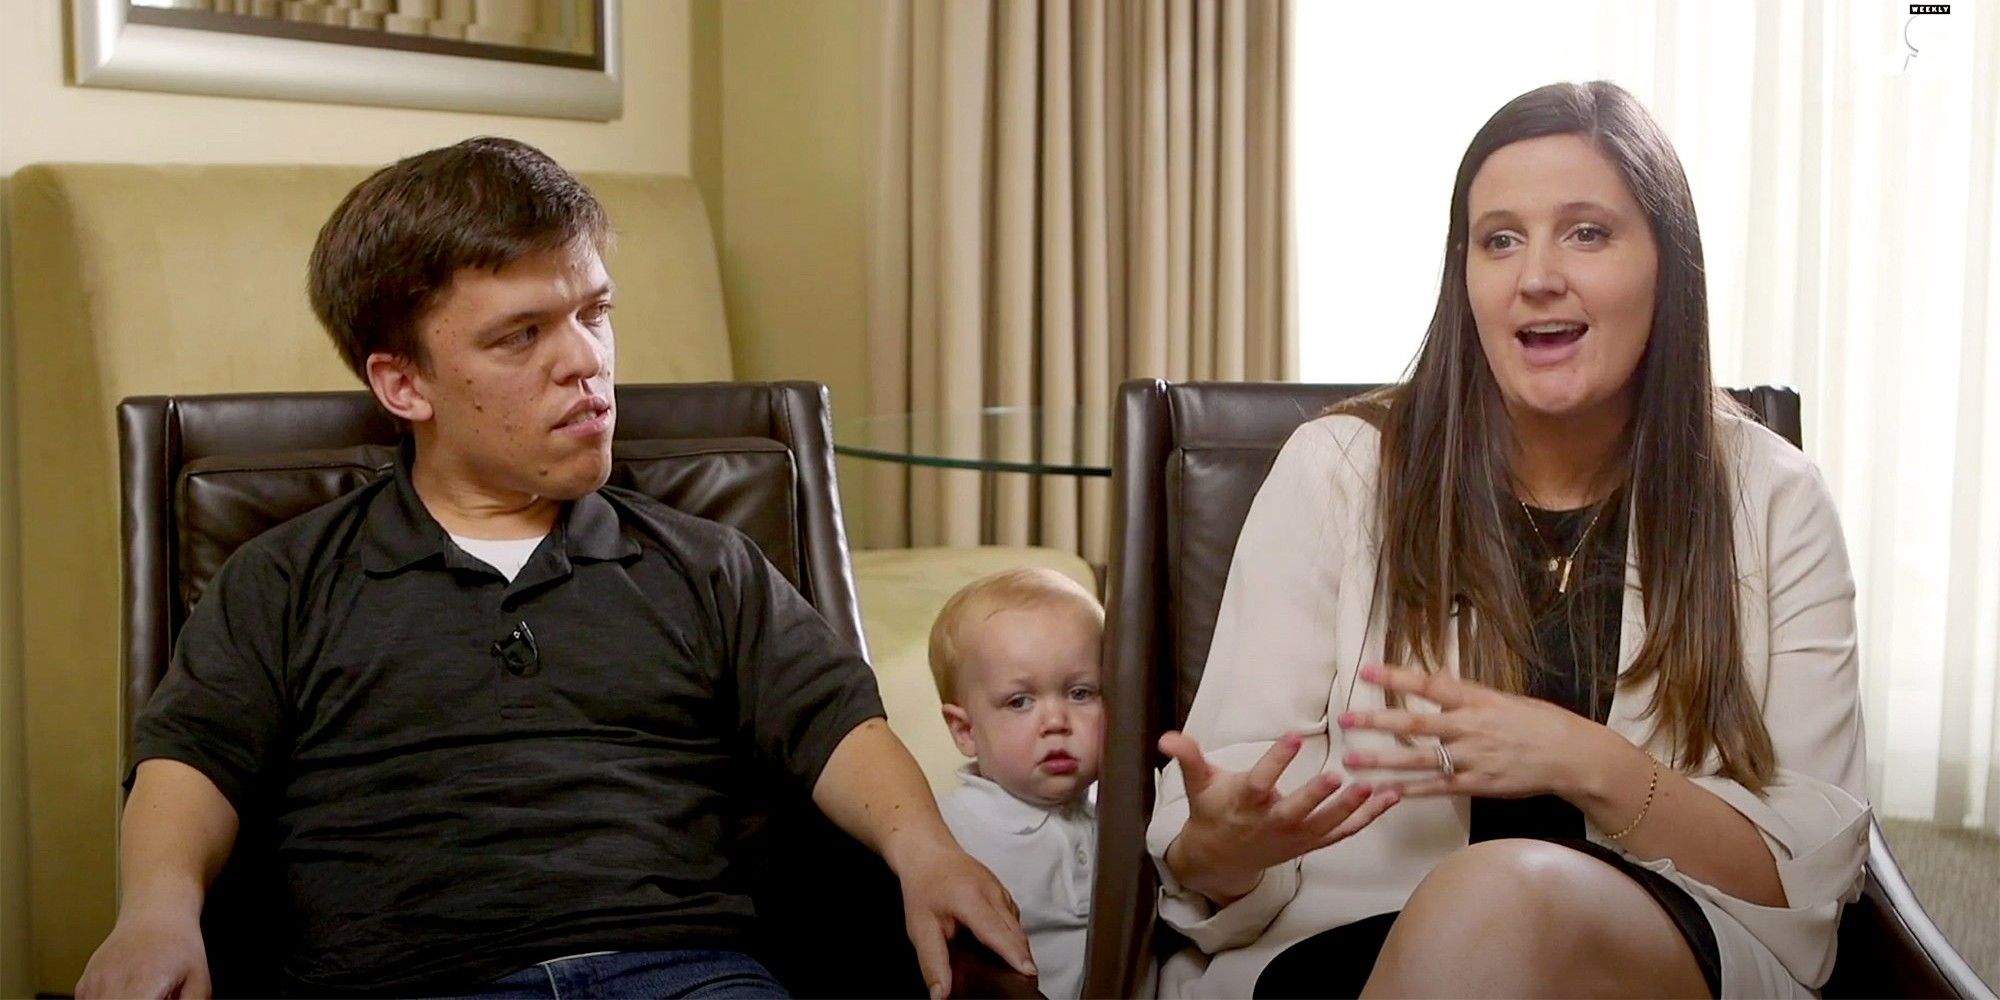 Zach and Tori Roloff sitting together on Little People Big World